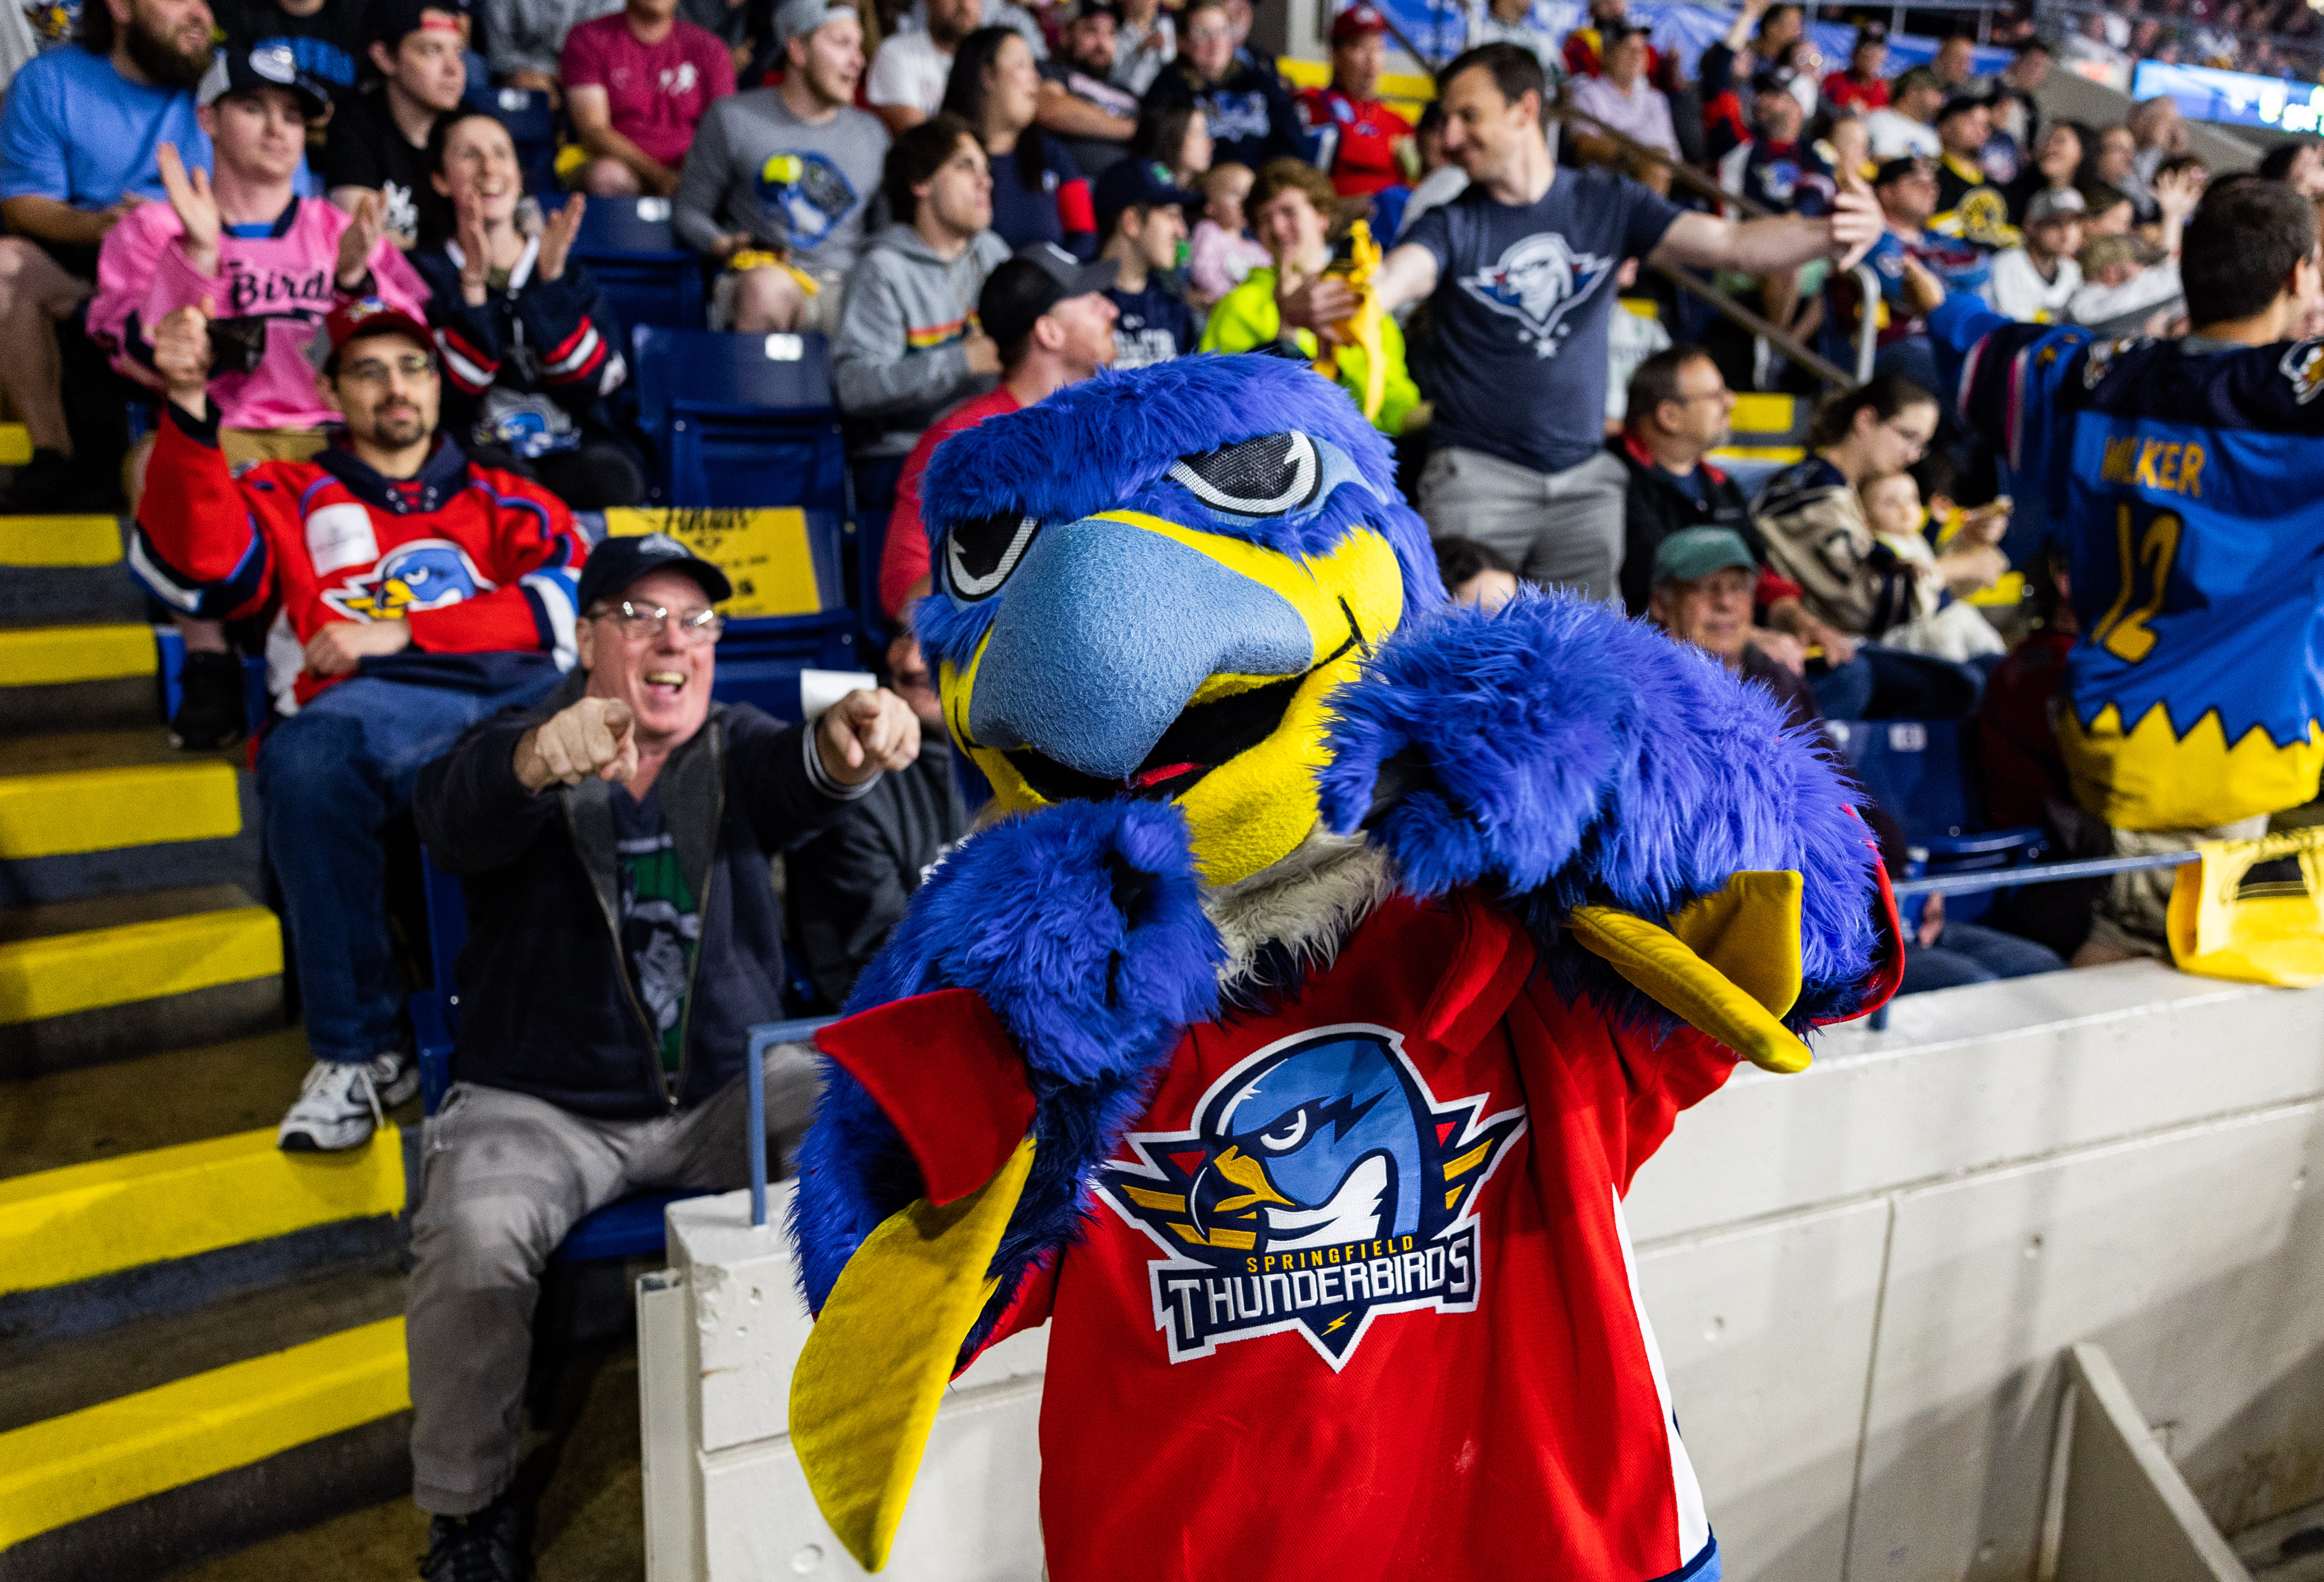 Boomer is comin' in hot with - Springfield Thunderbirds